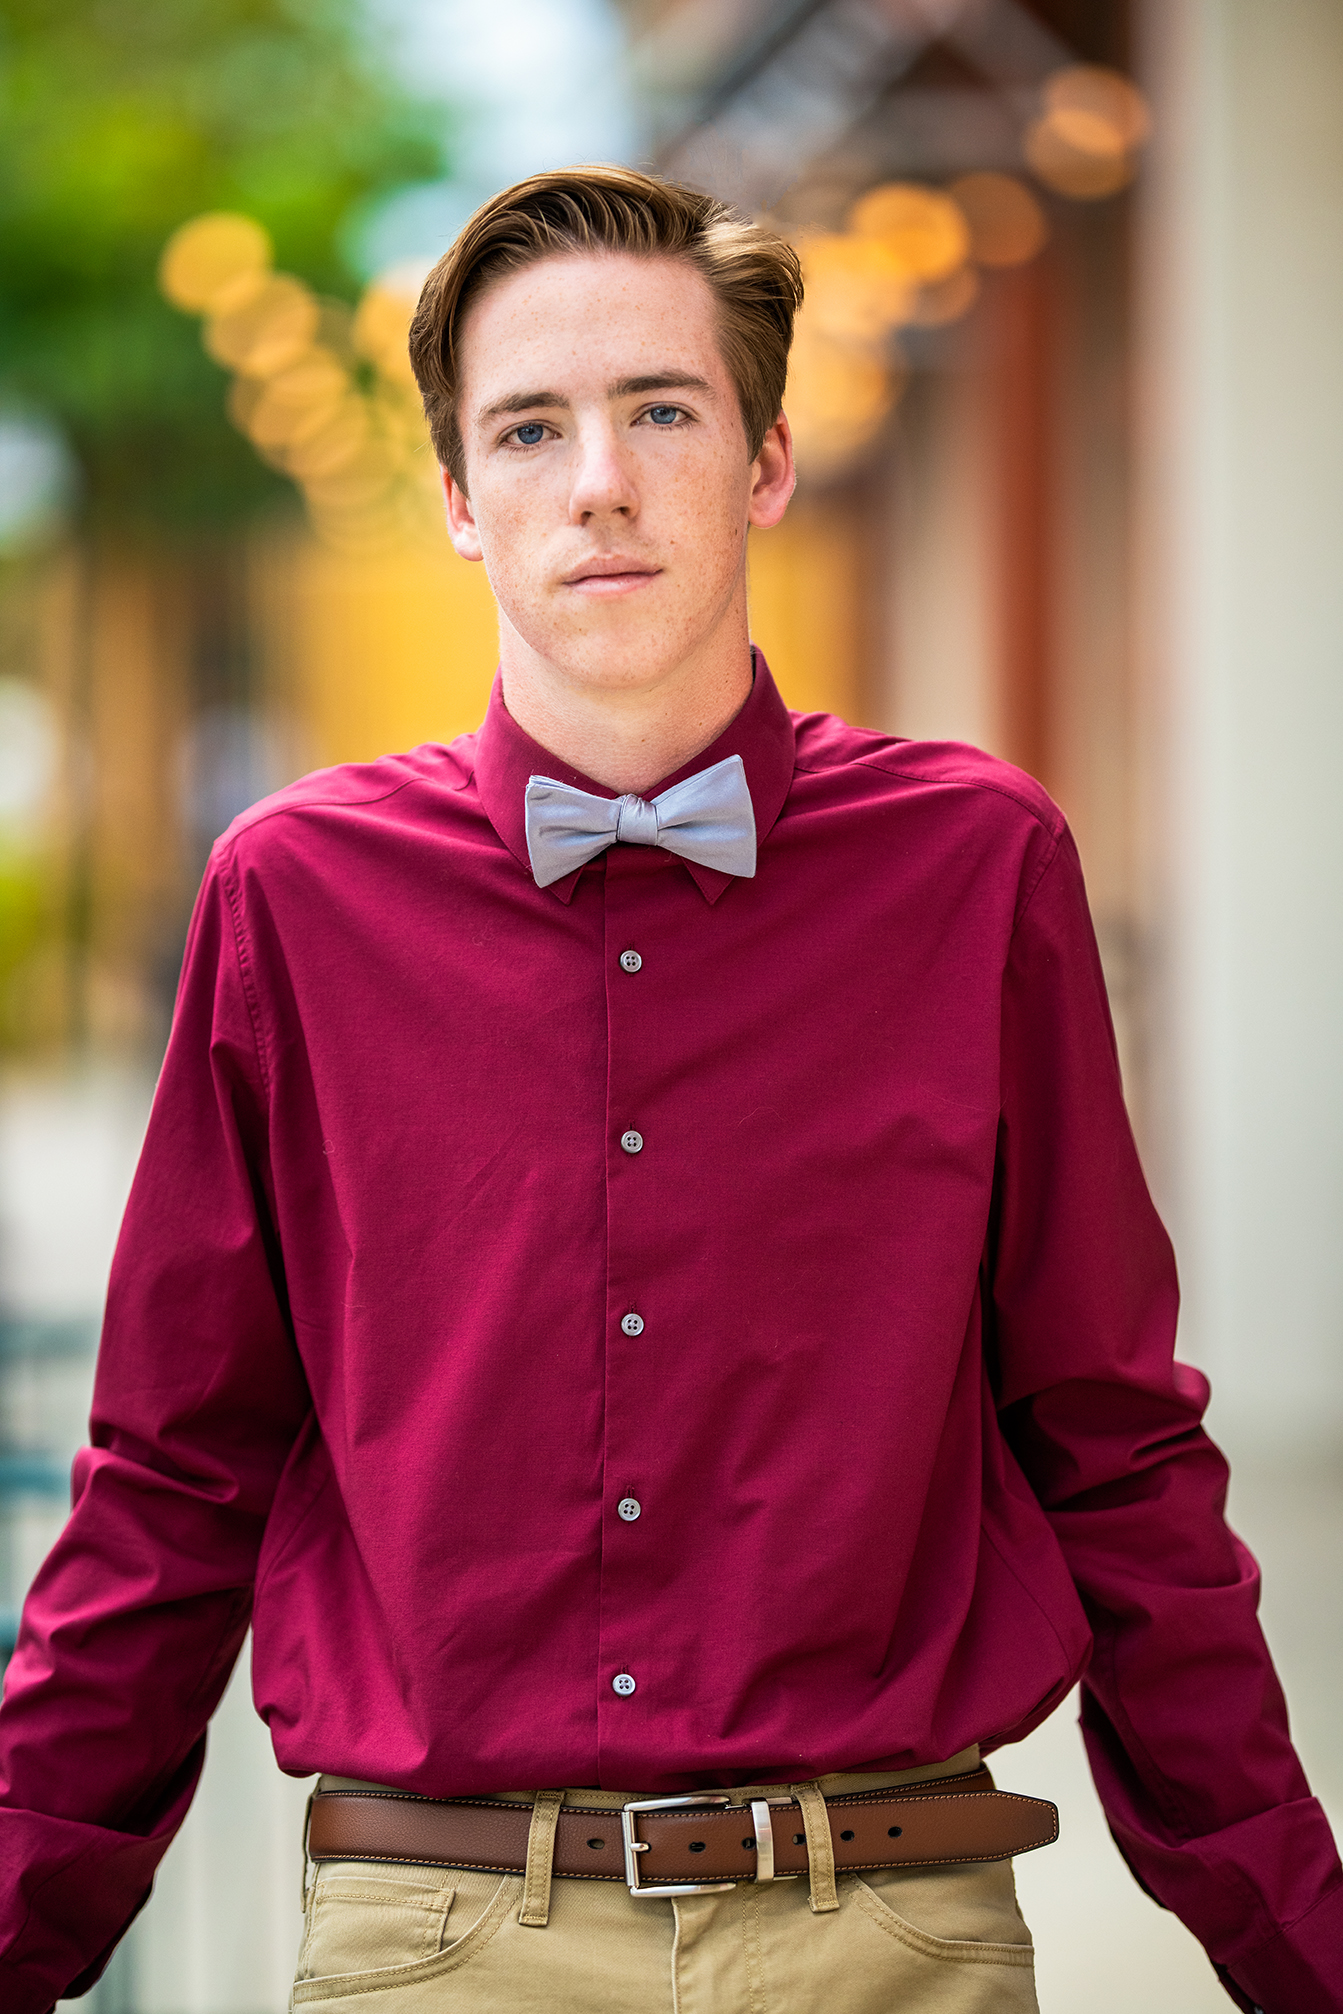 A young man dressed in a maroon shirt with a bowtie.